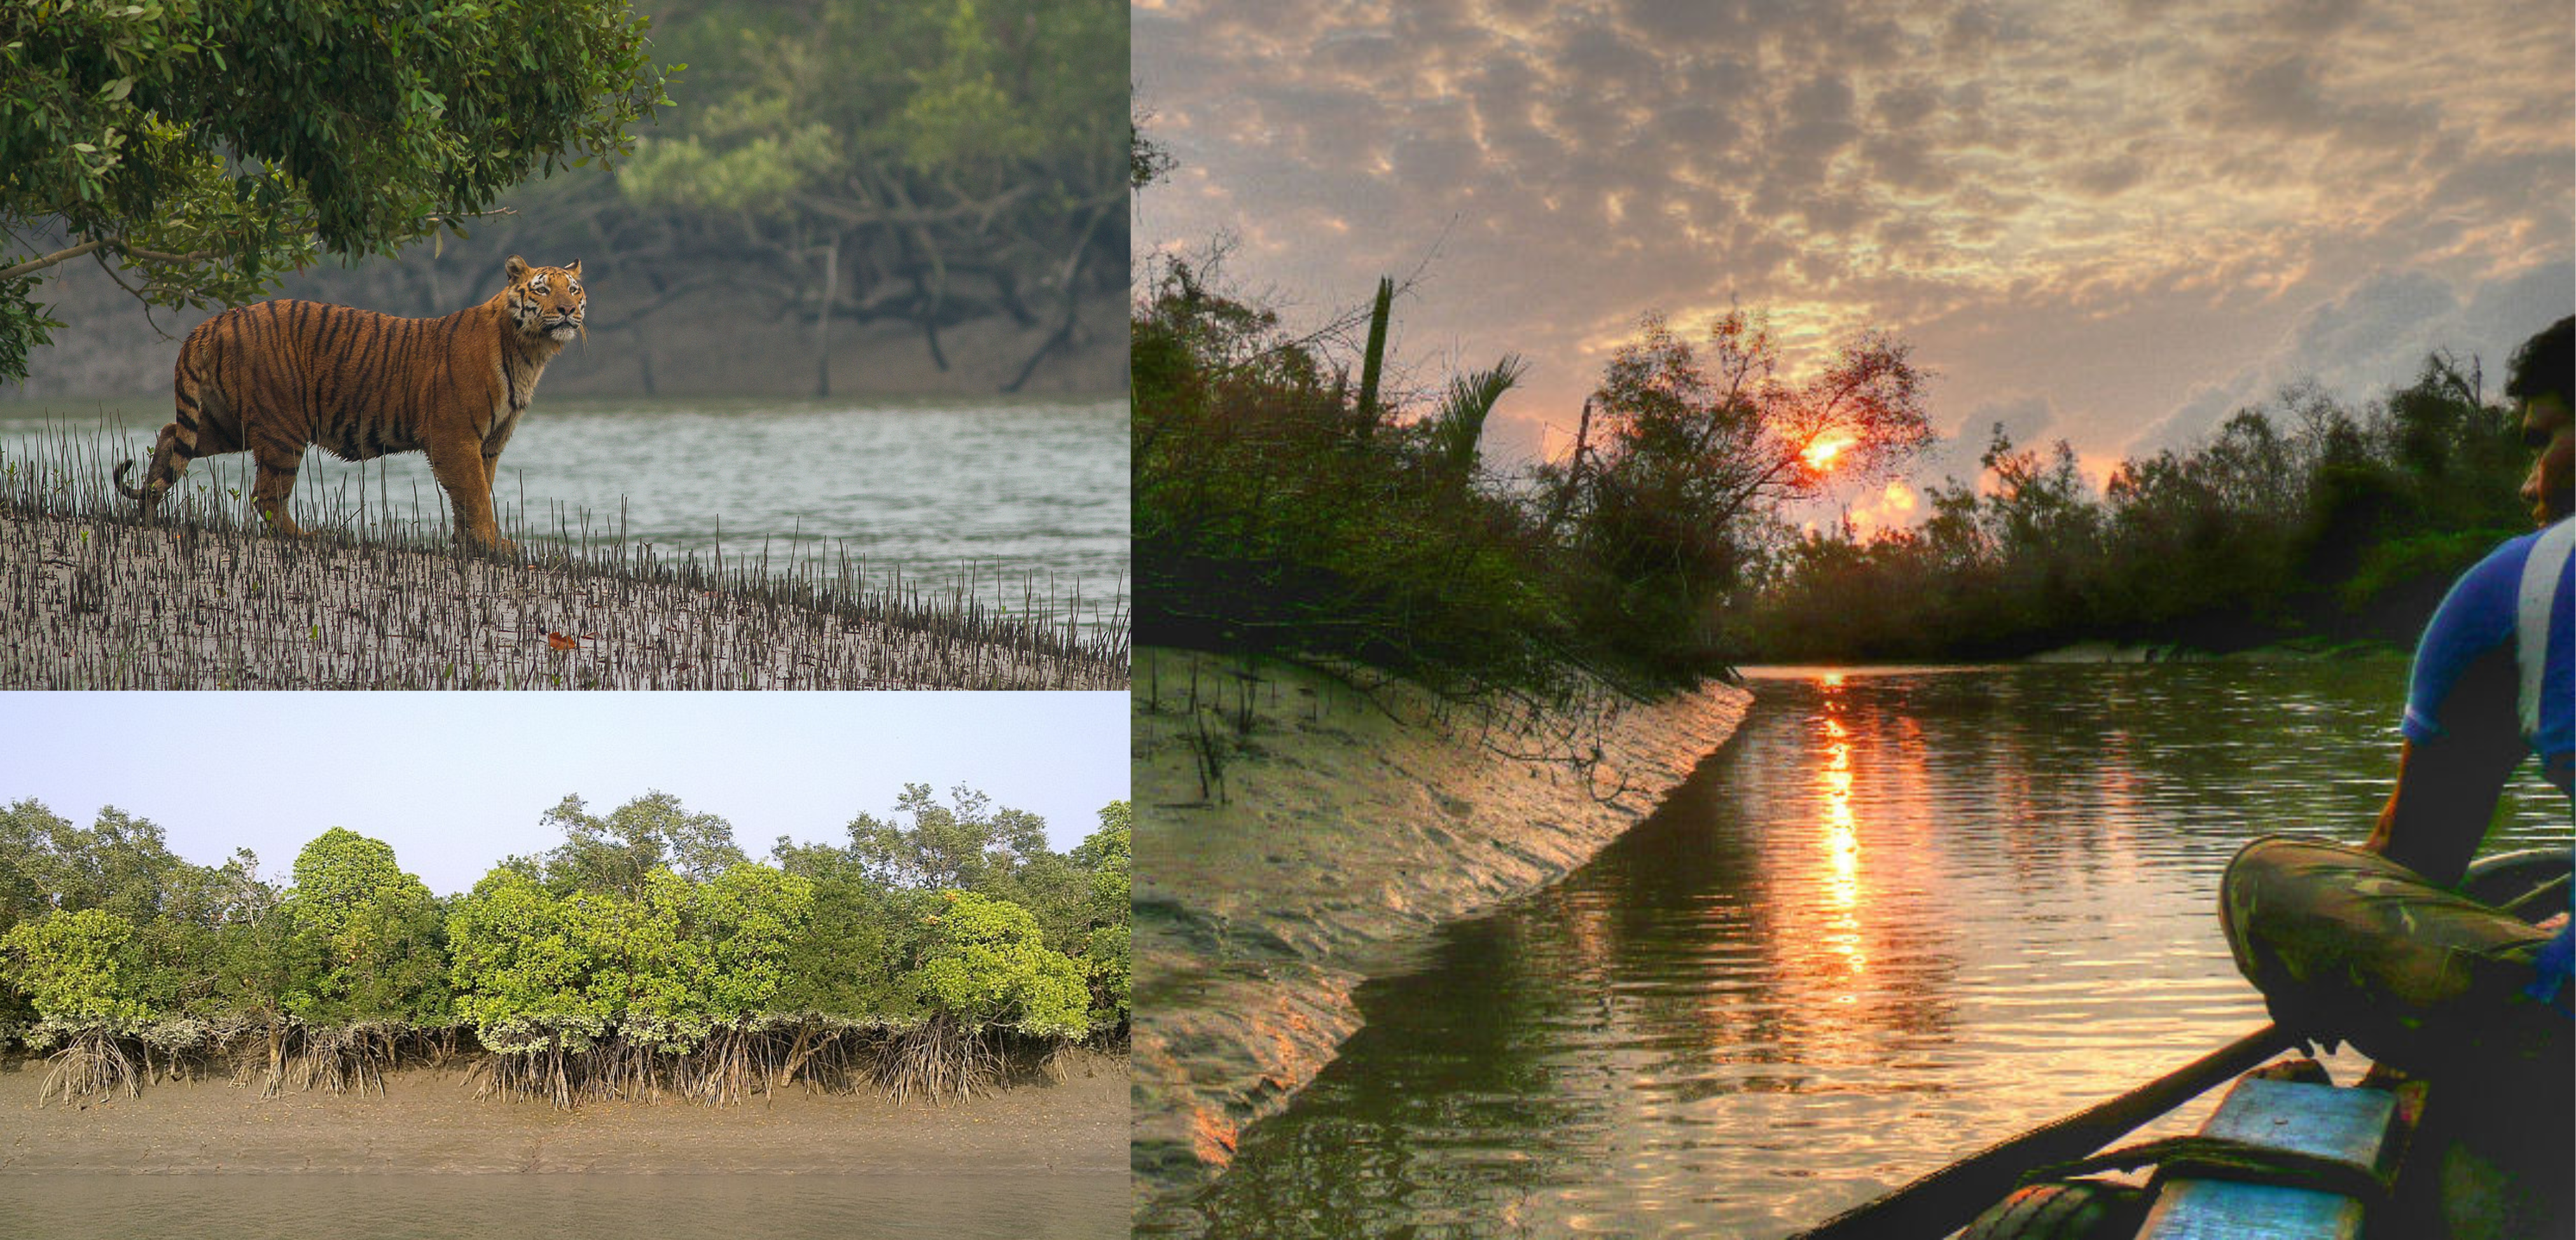 Sunderbans Mangrove Forests: A tiger and mangrove roots extending into the water along a river bank